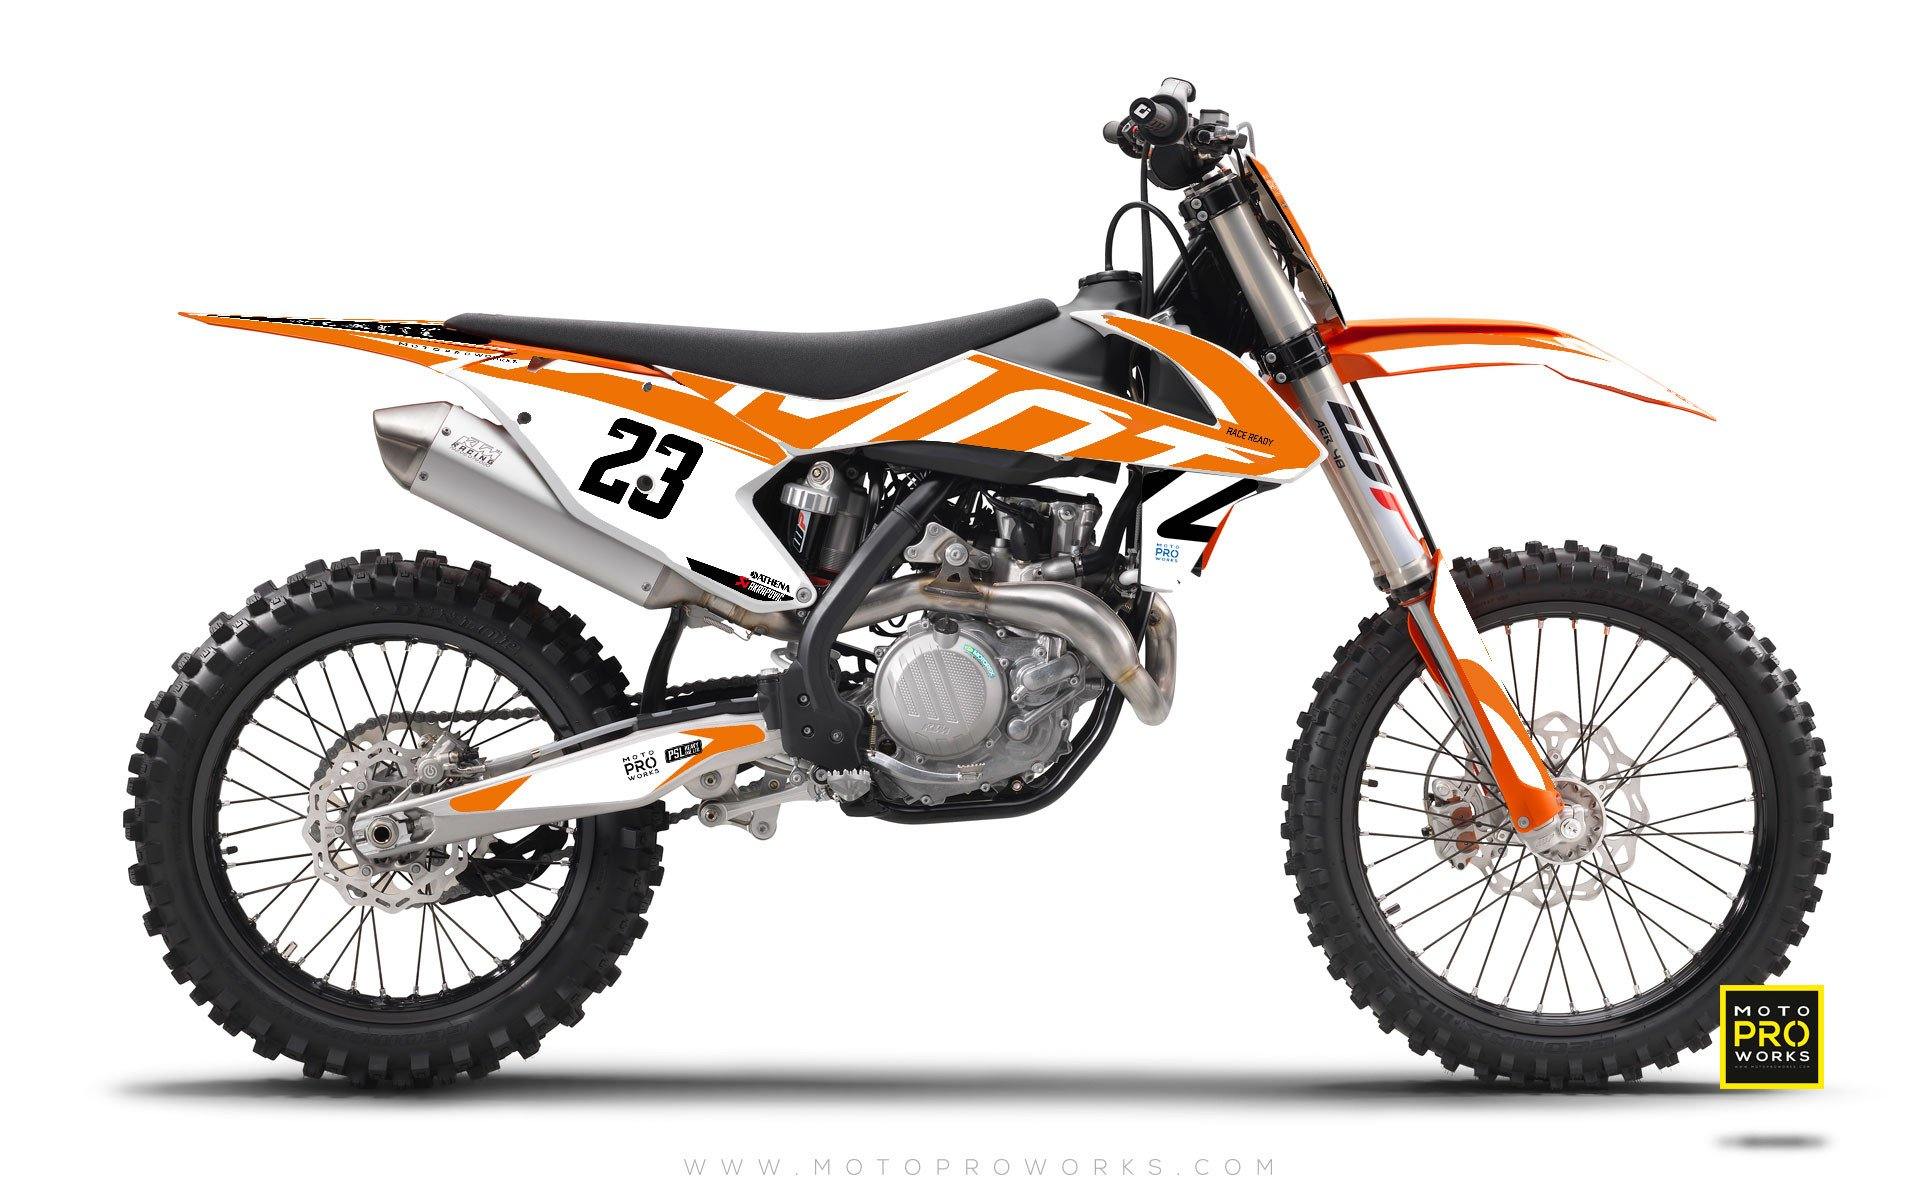 KTM GRAPHIC KIT - "APEX" (light) - MotoProWorks | Decals and Bike Graphic kit